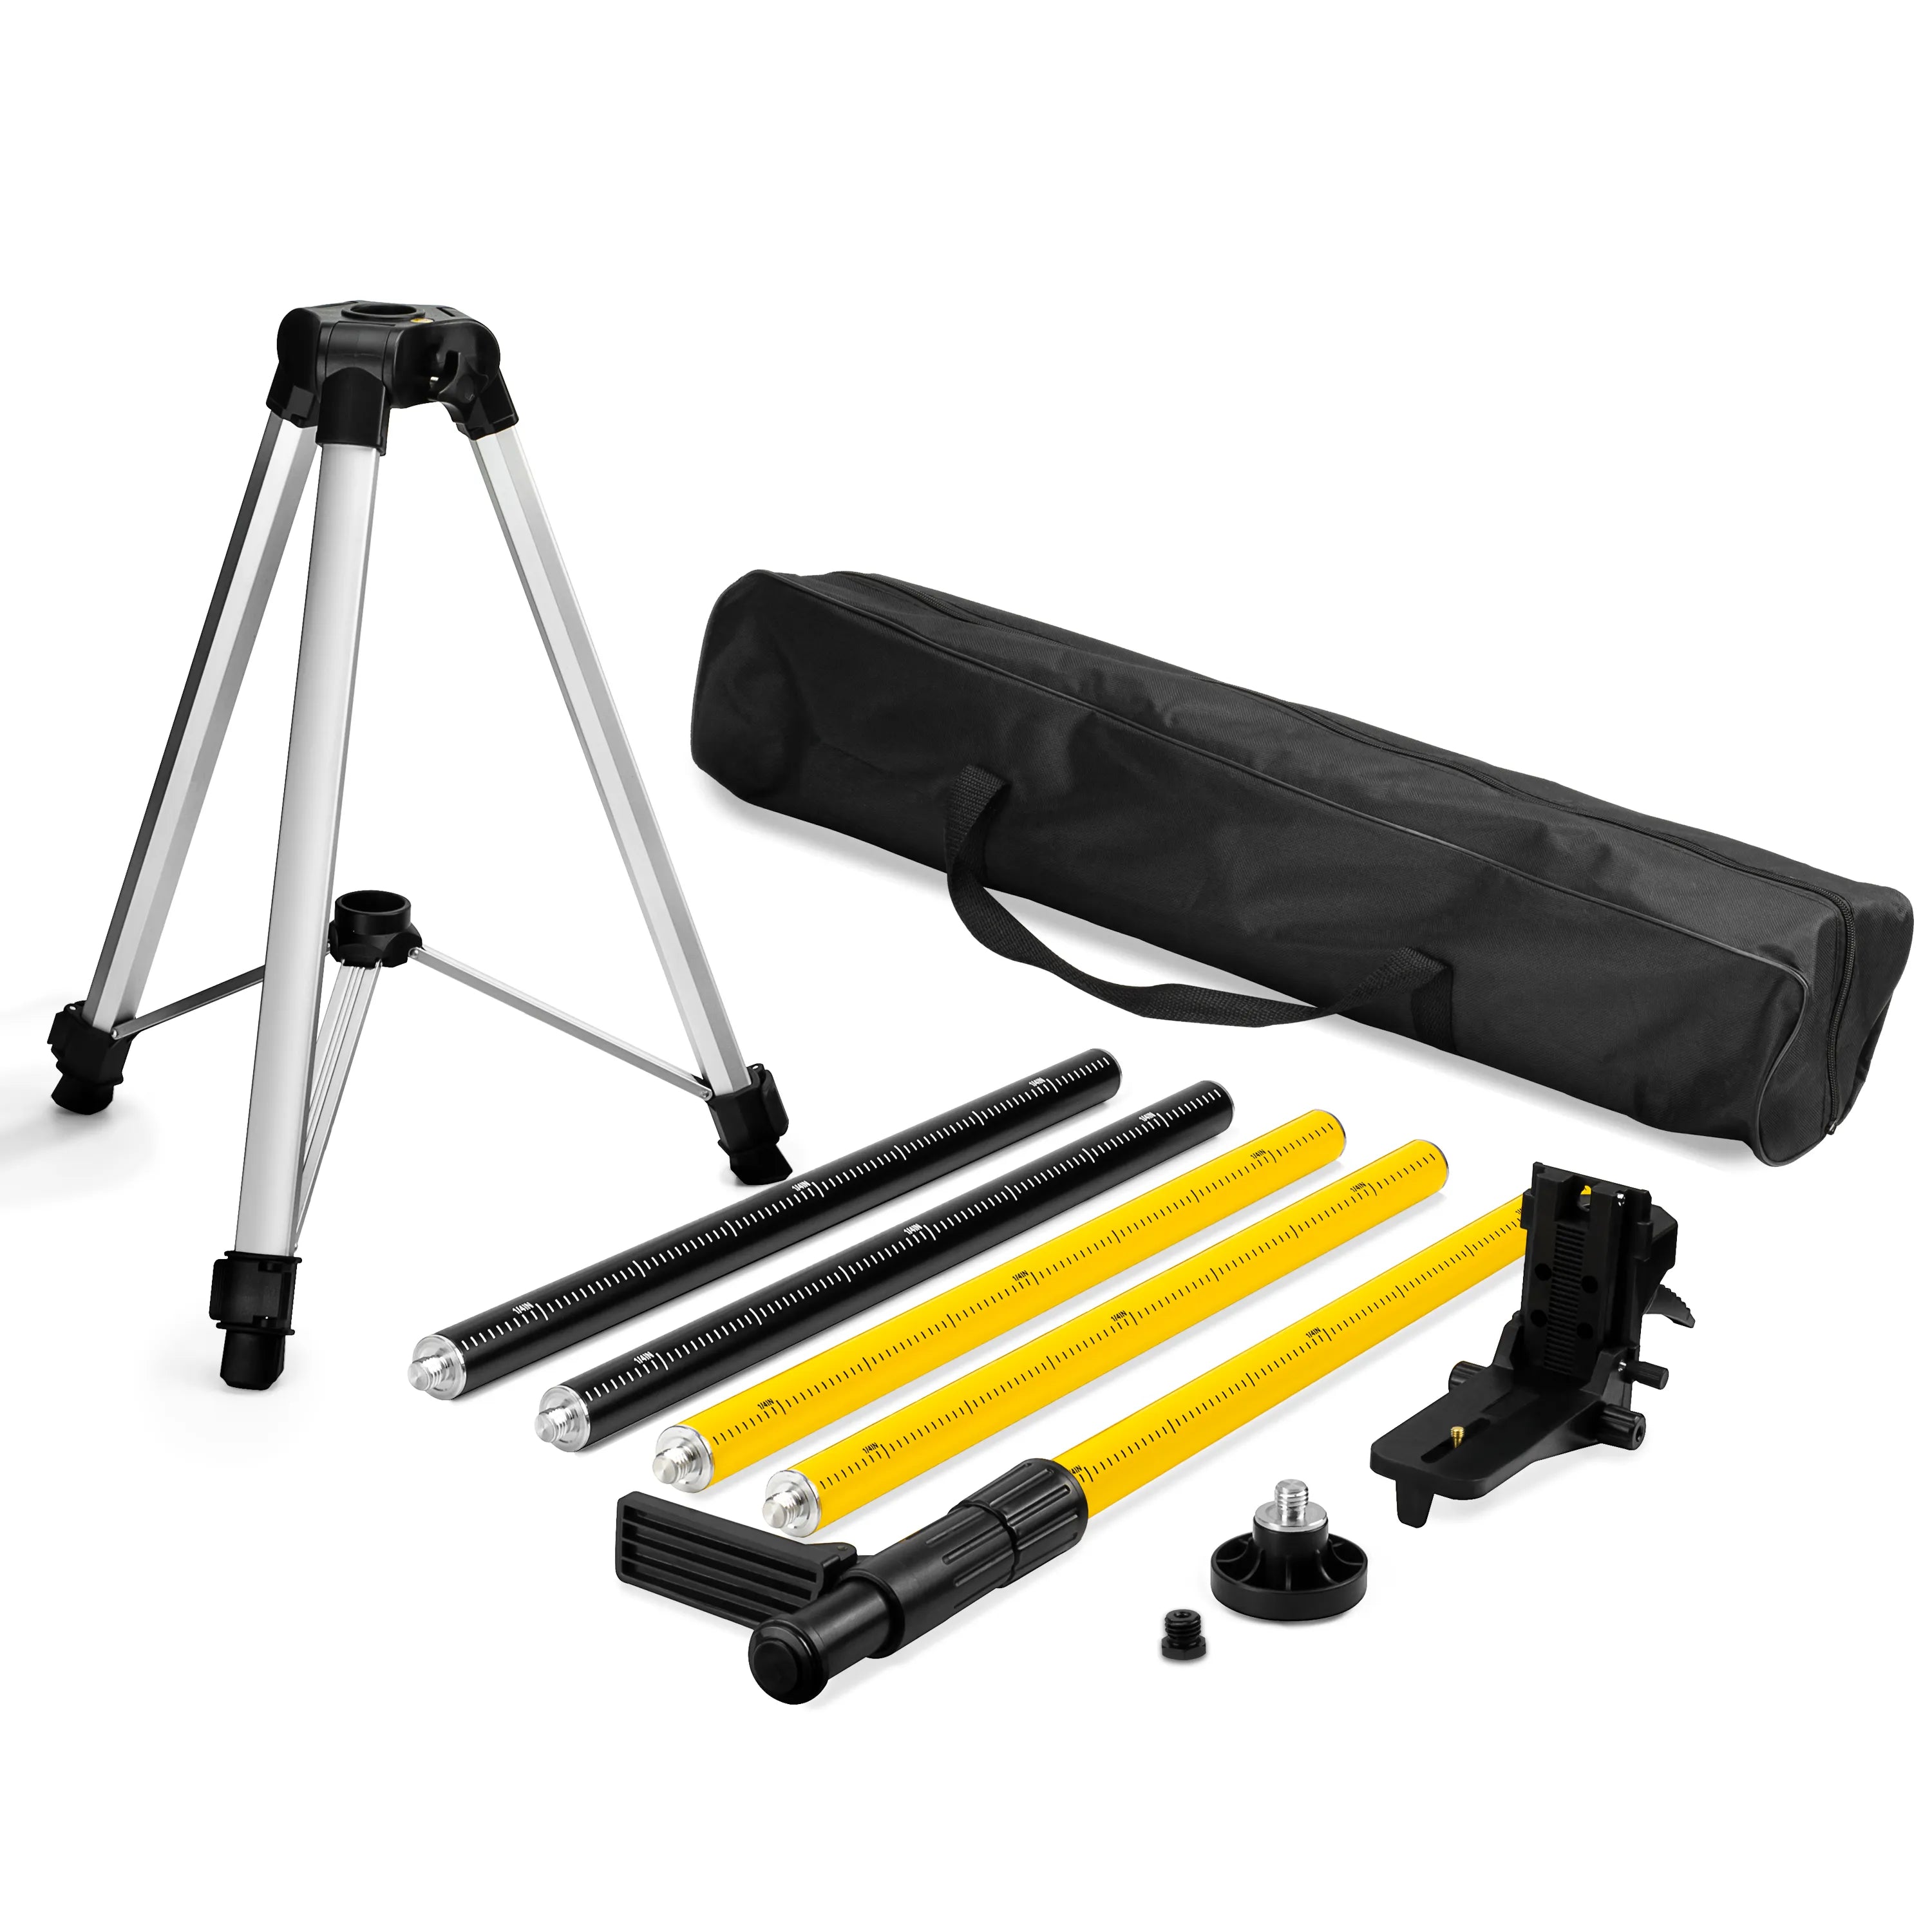 http://kaiweets.com/cdn/shop/files/kaiweets-kt-100p-professional-laser-level-elevating-tripod-with-12-18ft-telescopic-rod-kaiweets-1_93ab9139-0a4a-4d37-97d2-644044d30e64.webp?v=1687144920